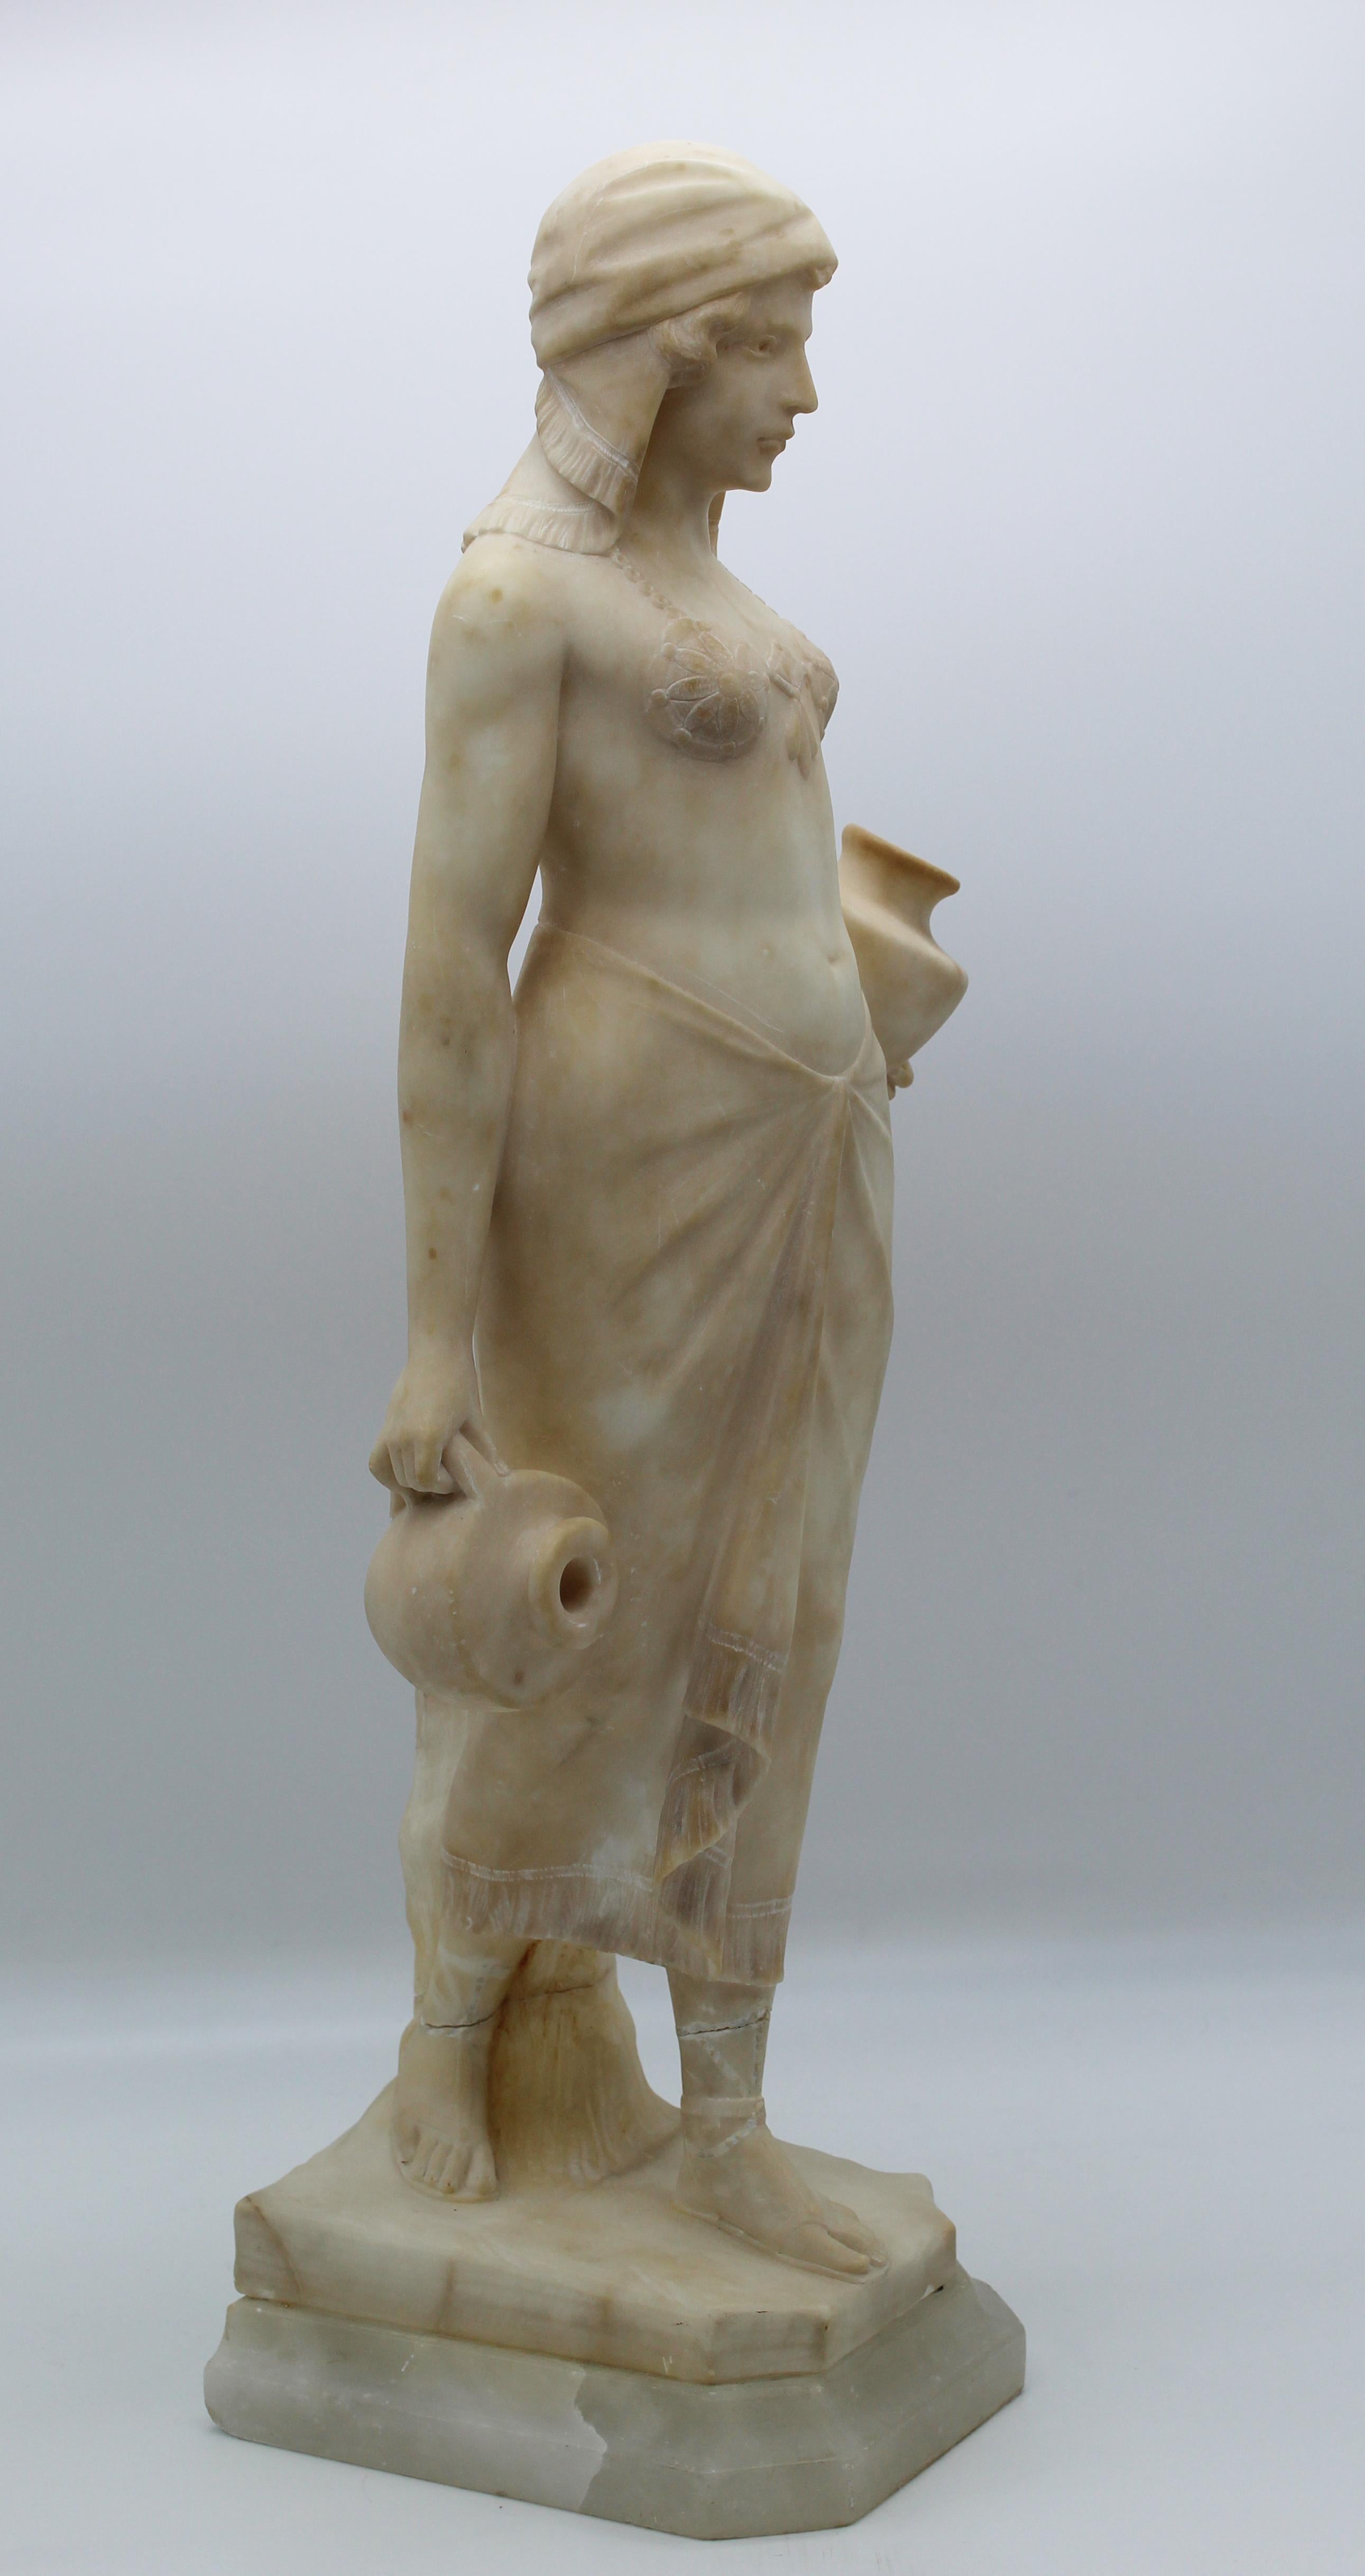 A very beautiful and impressive sculpture portraying a woman that is carryng water; the style and the details of the sculpture is a classical example of art Déco, some decorations and some dressing accents show influences of the exotic area as an